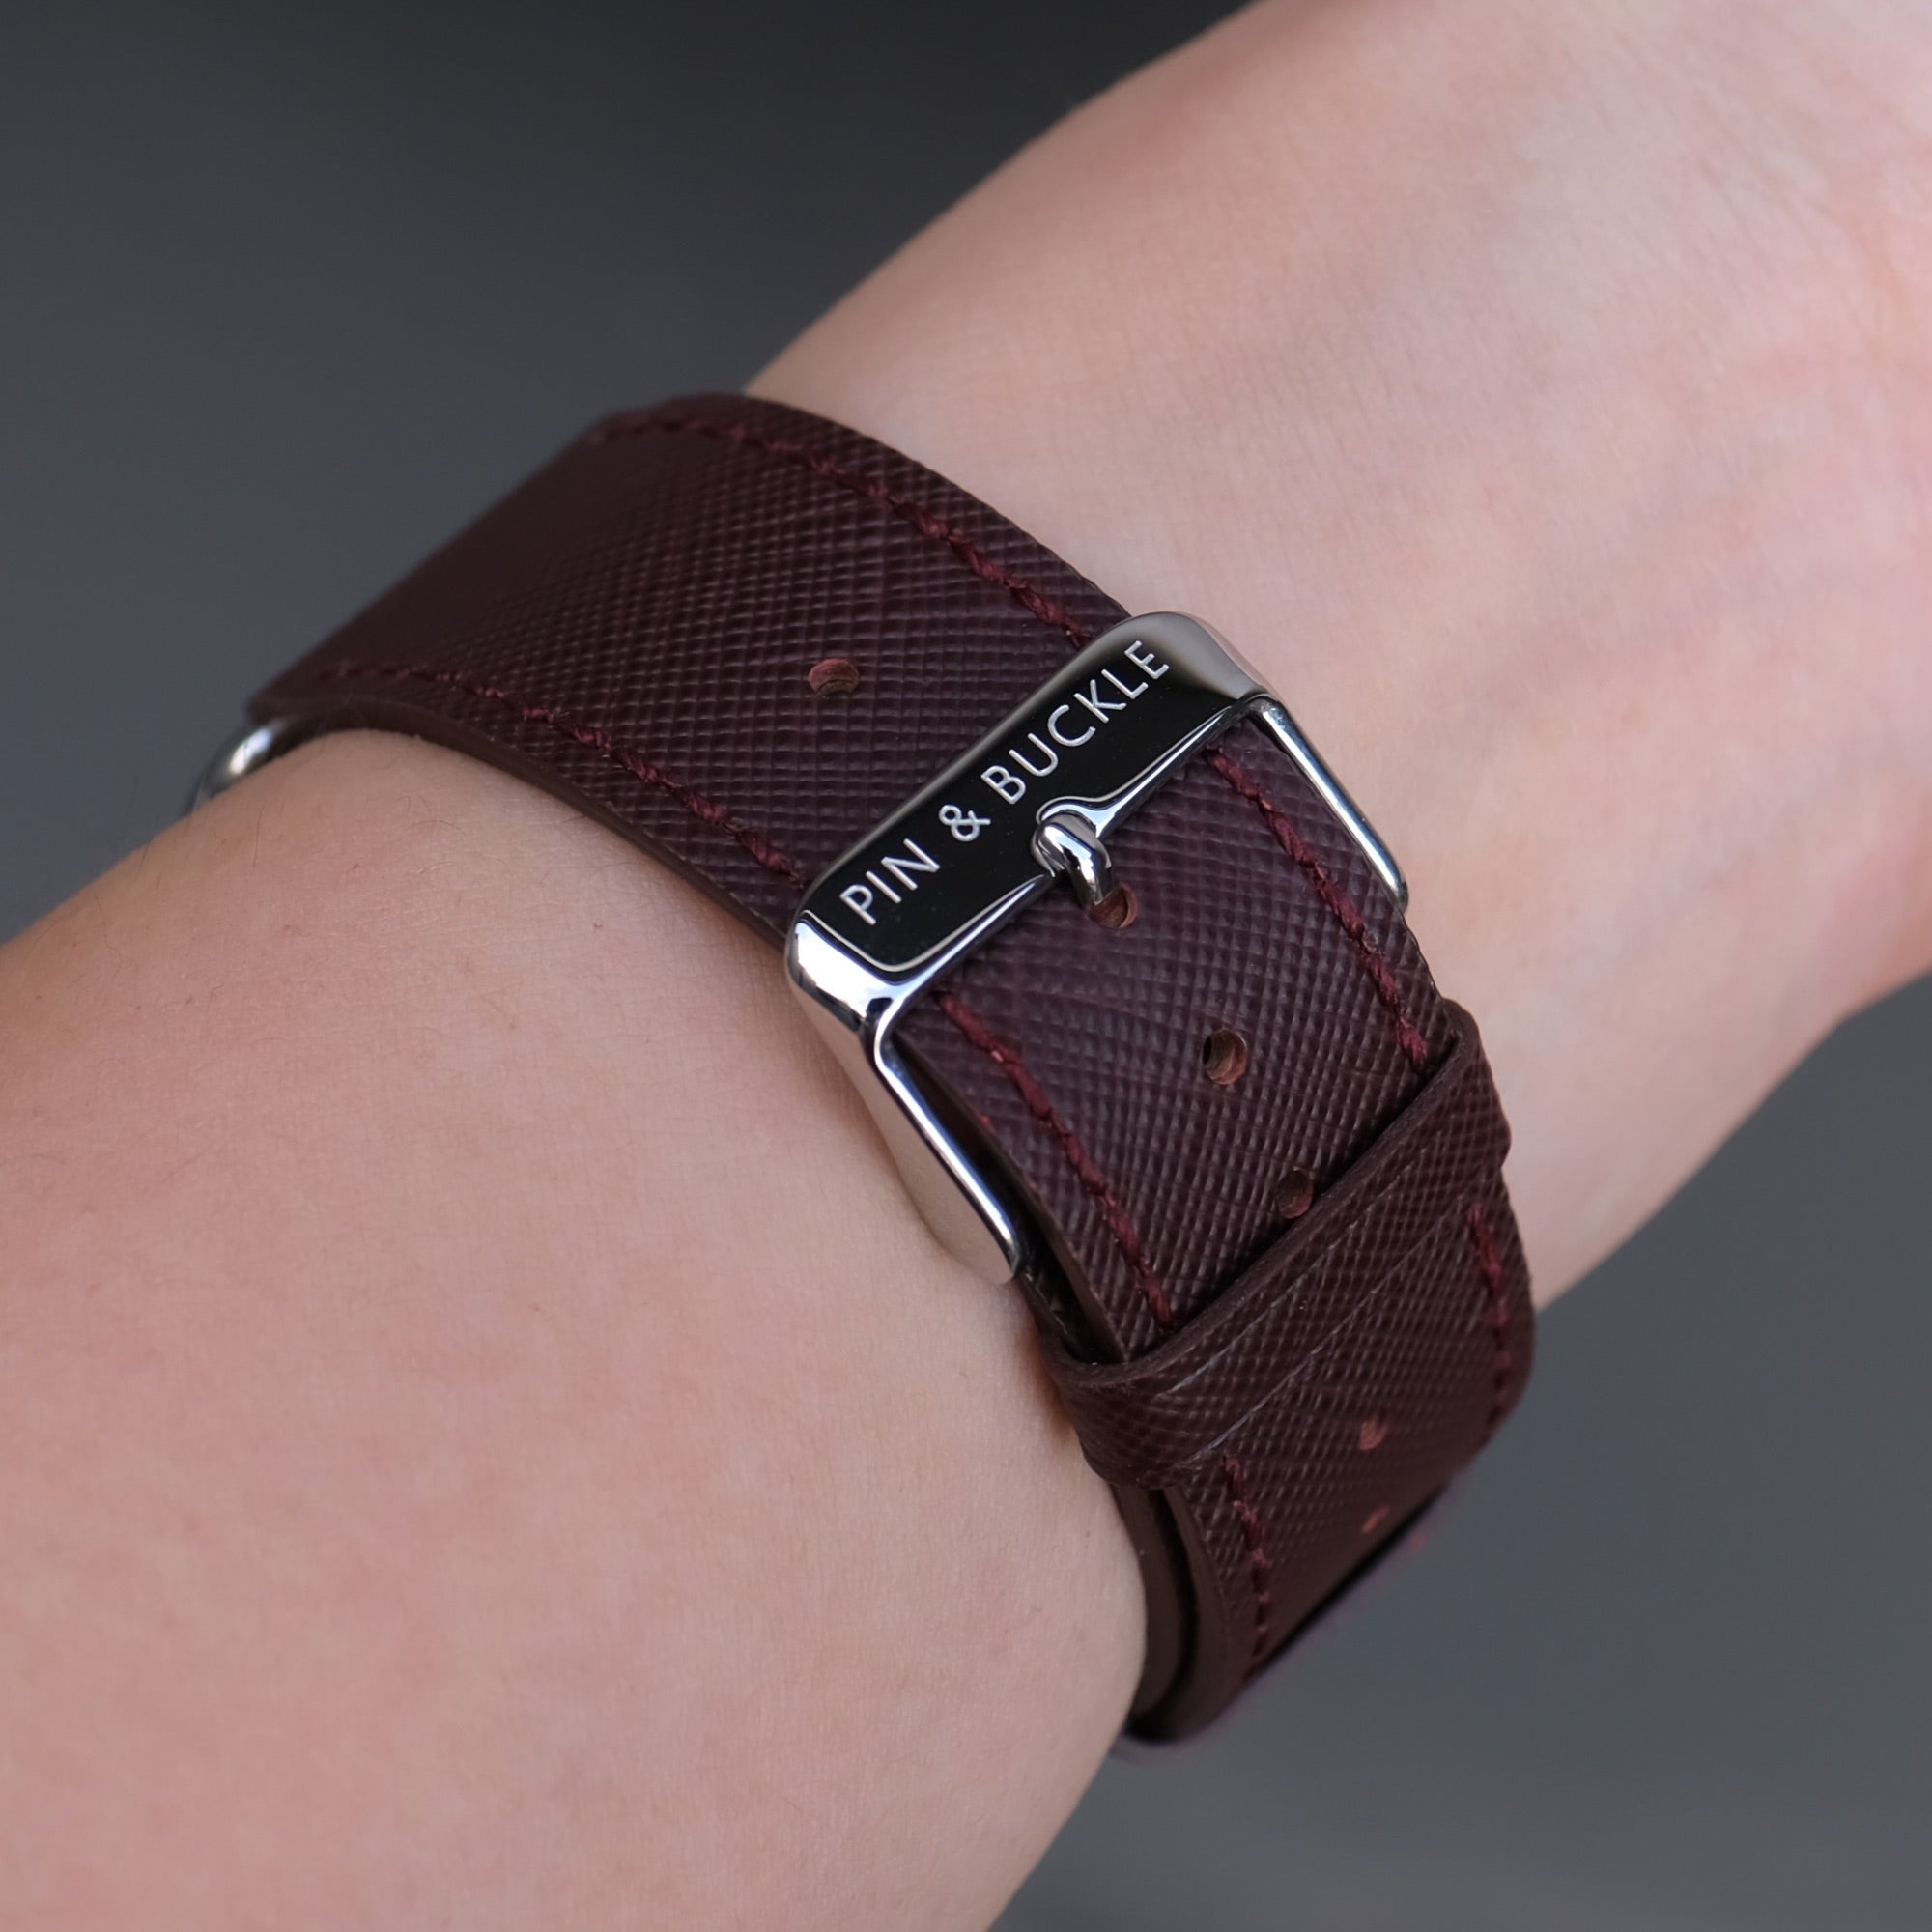 Pin and Buckle Apple Watch Bands - Saffiano - Textured Leather Apple Watch Bands - Bordeaux on Silver Stainless Steel - Buckle